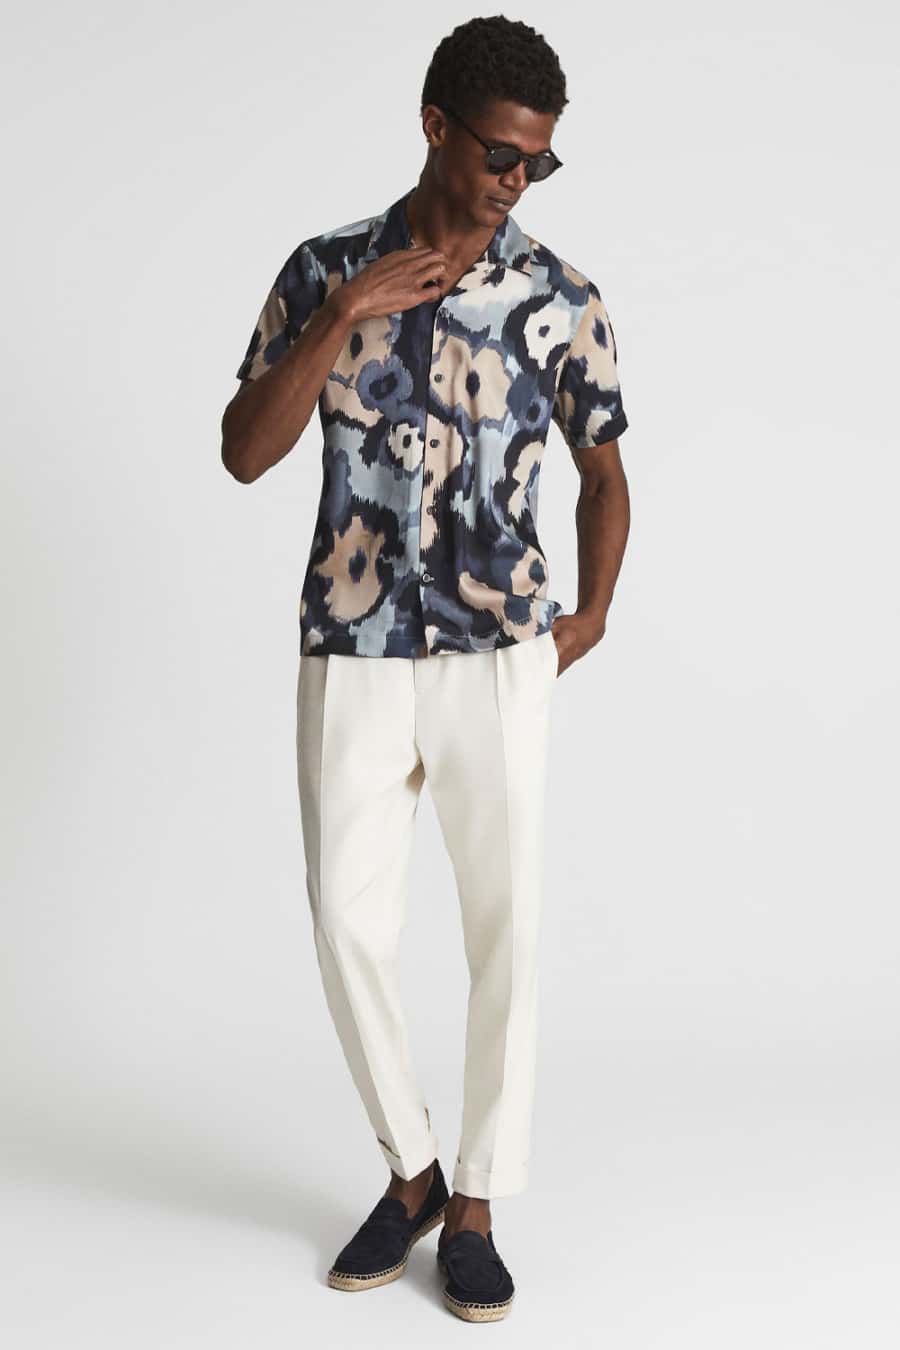 Men's floral short sleeve shirt with white trousers and espadrilles outfit